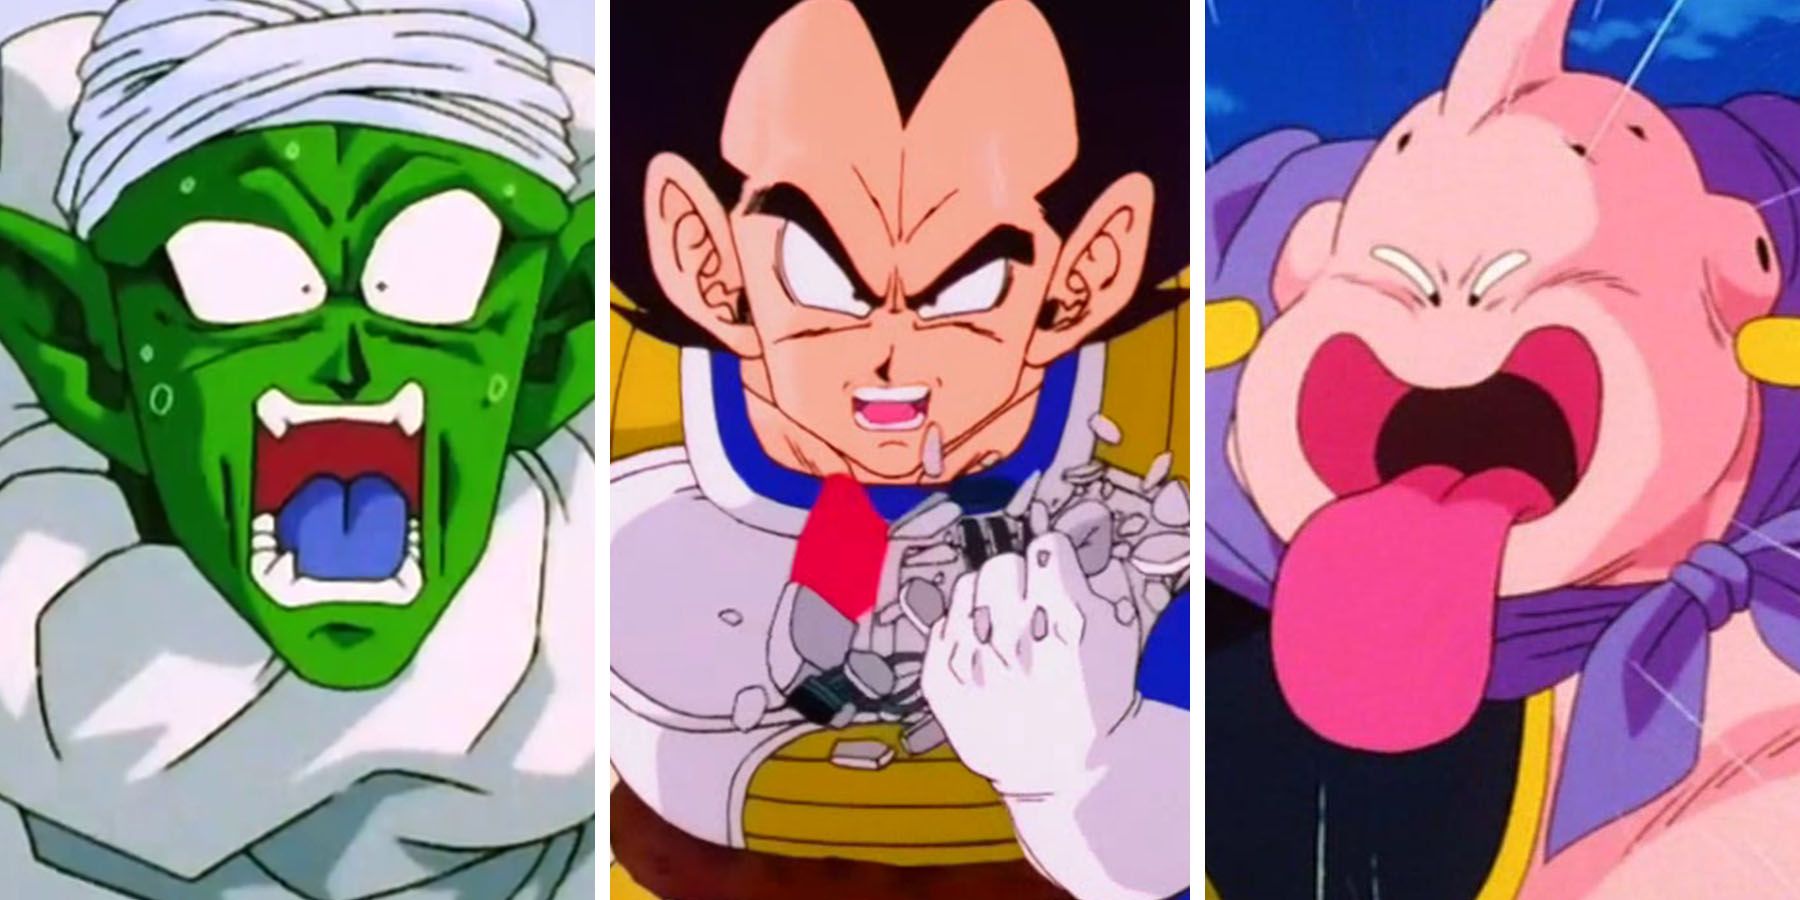 15 Dragon Ball Characters Who've Died And Come Back The Most